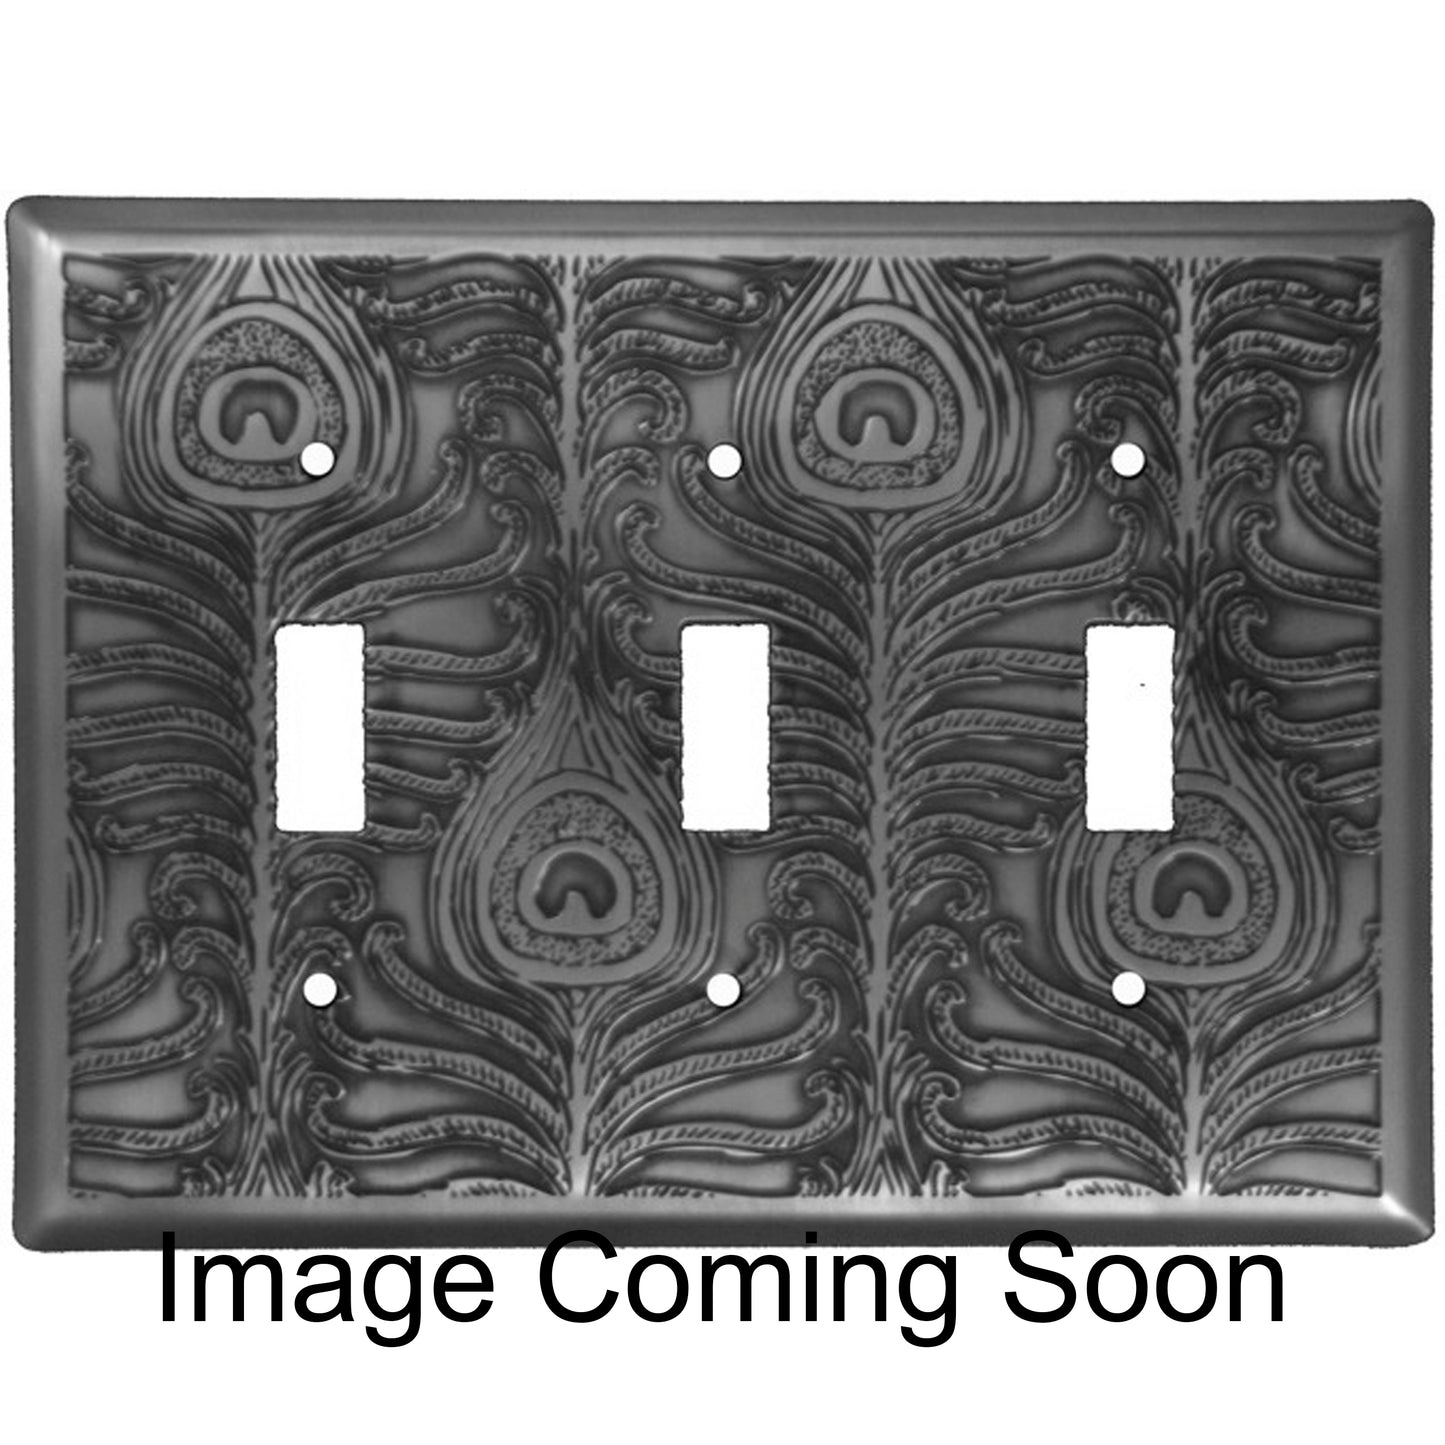 Peacock Stainless Steel Triple Toggle Switchplate